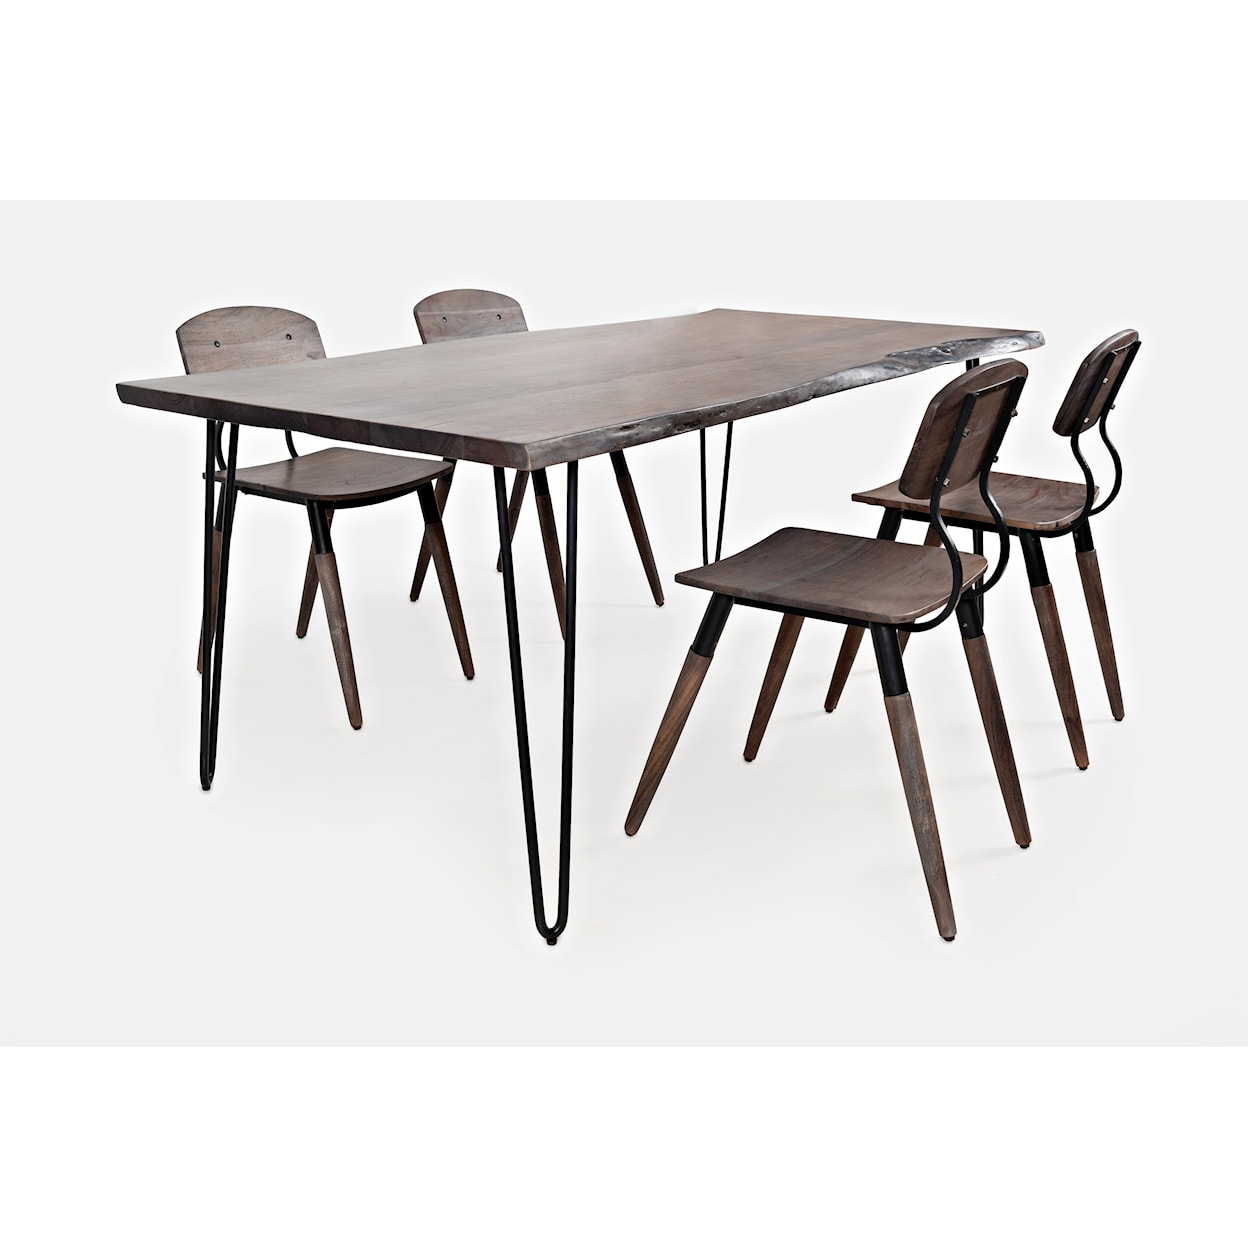 VFM Signature Nature's Edge 5-Piece Table and Chair Set